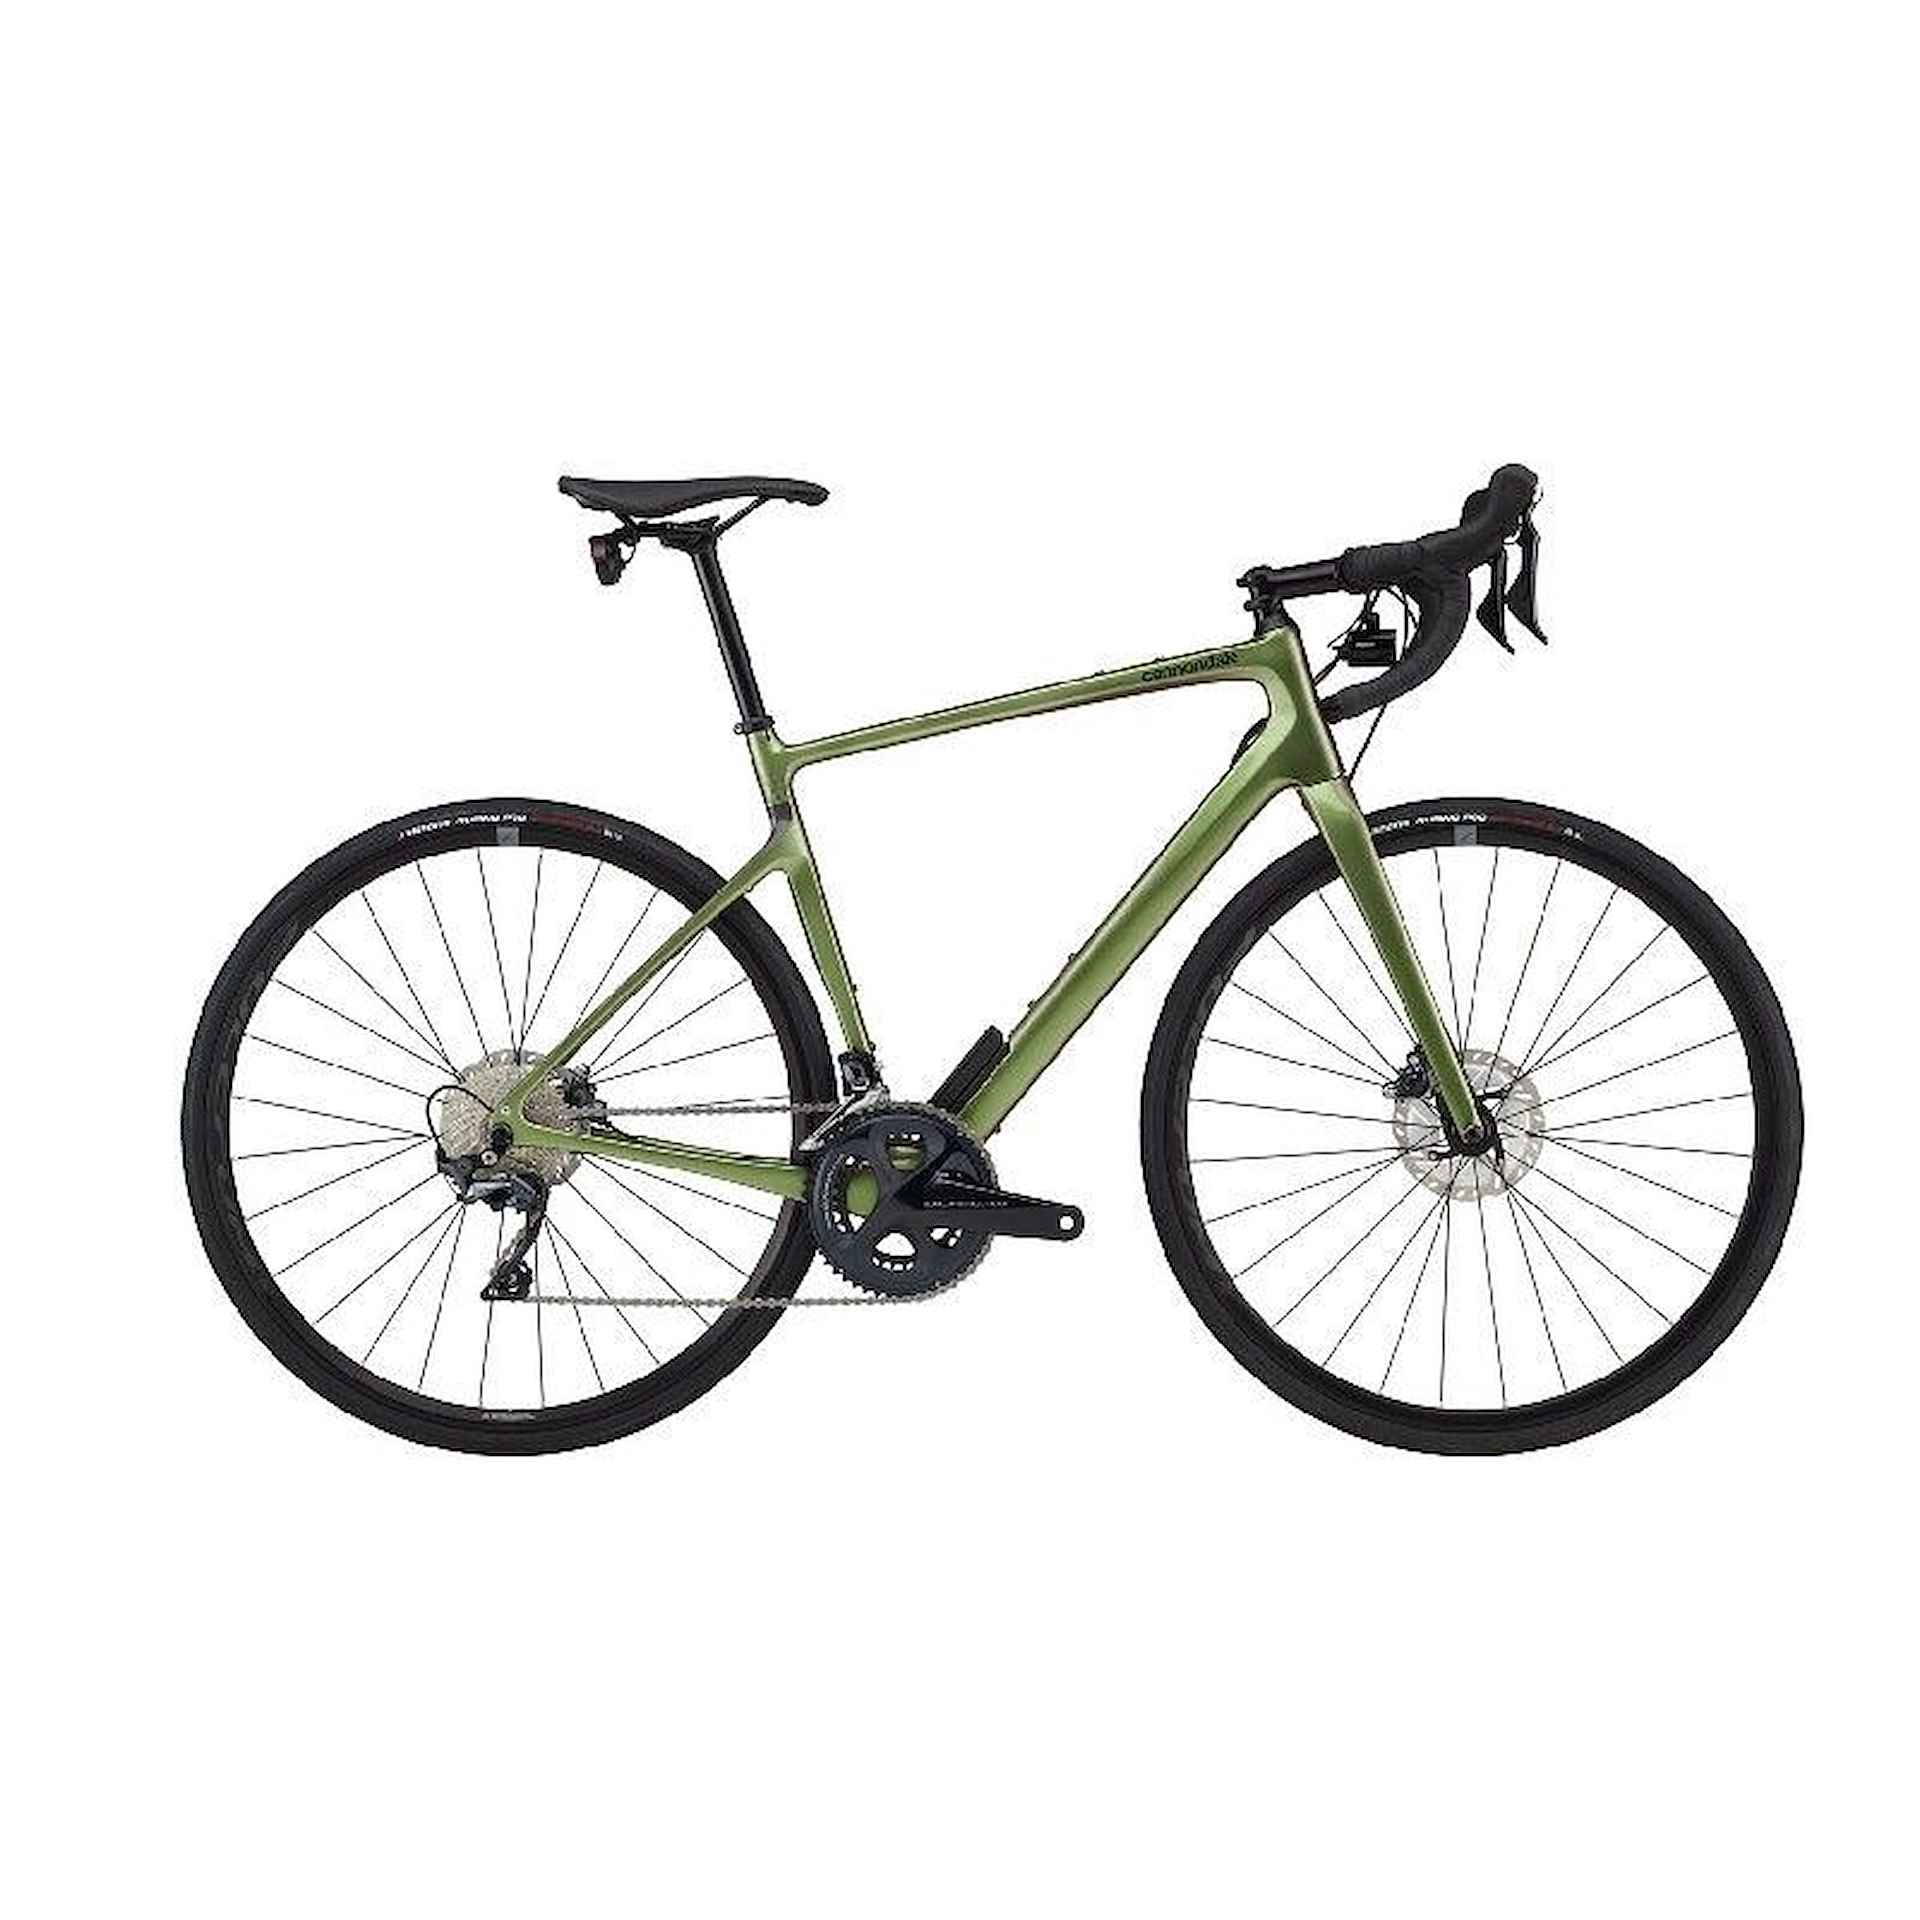 Cannondale Synapse Crb Beetle Green 56cm 2021 - 1/1